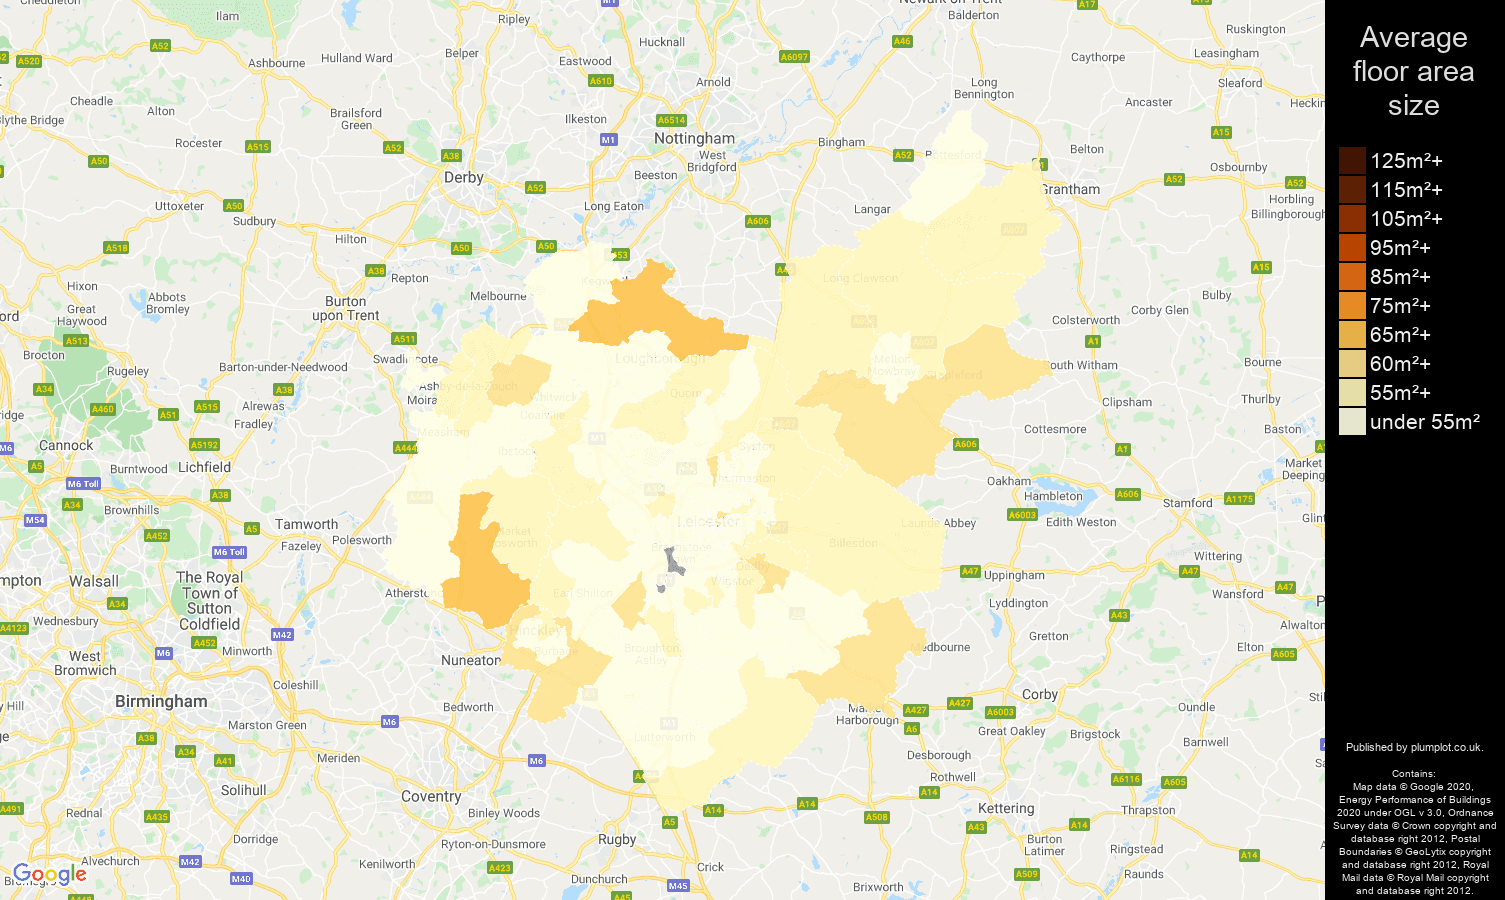 Leicestershire map of average floor area size of flats